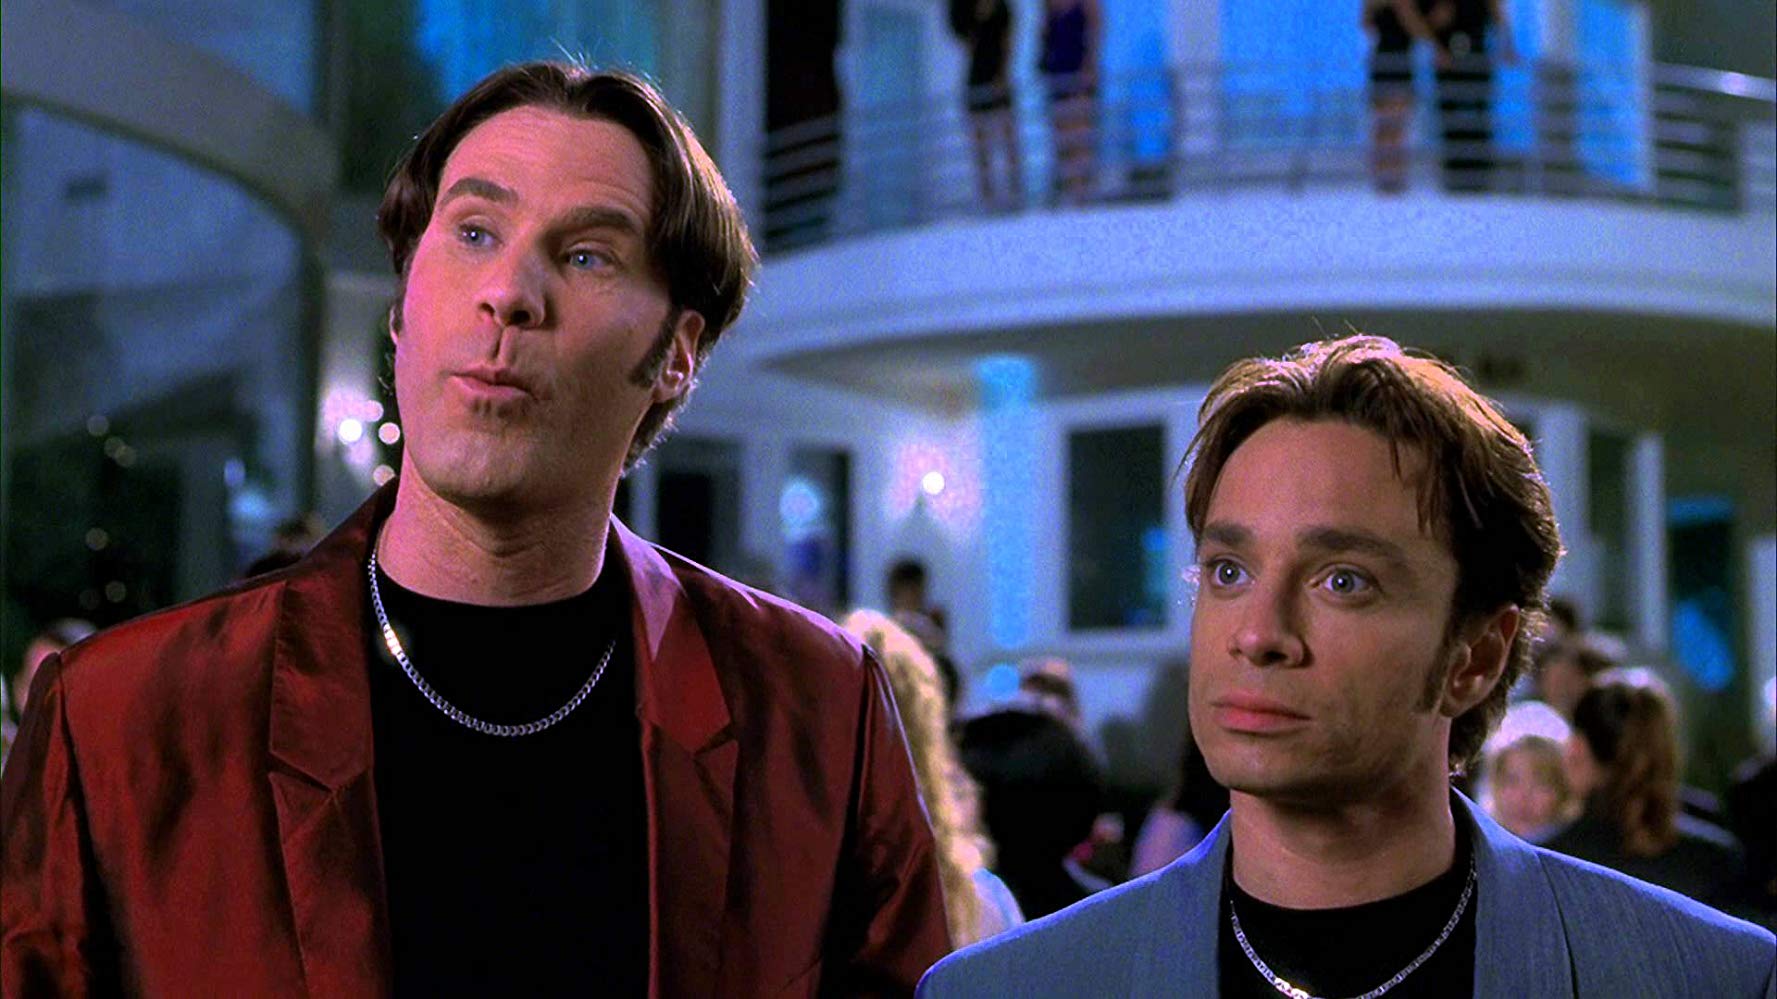 Will Ferrell (left) and Chris Kattan (right) in A Night at the Roxbury